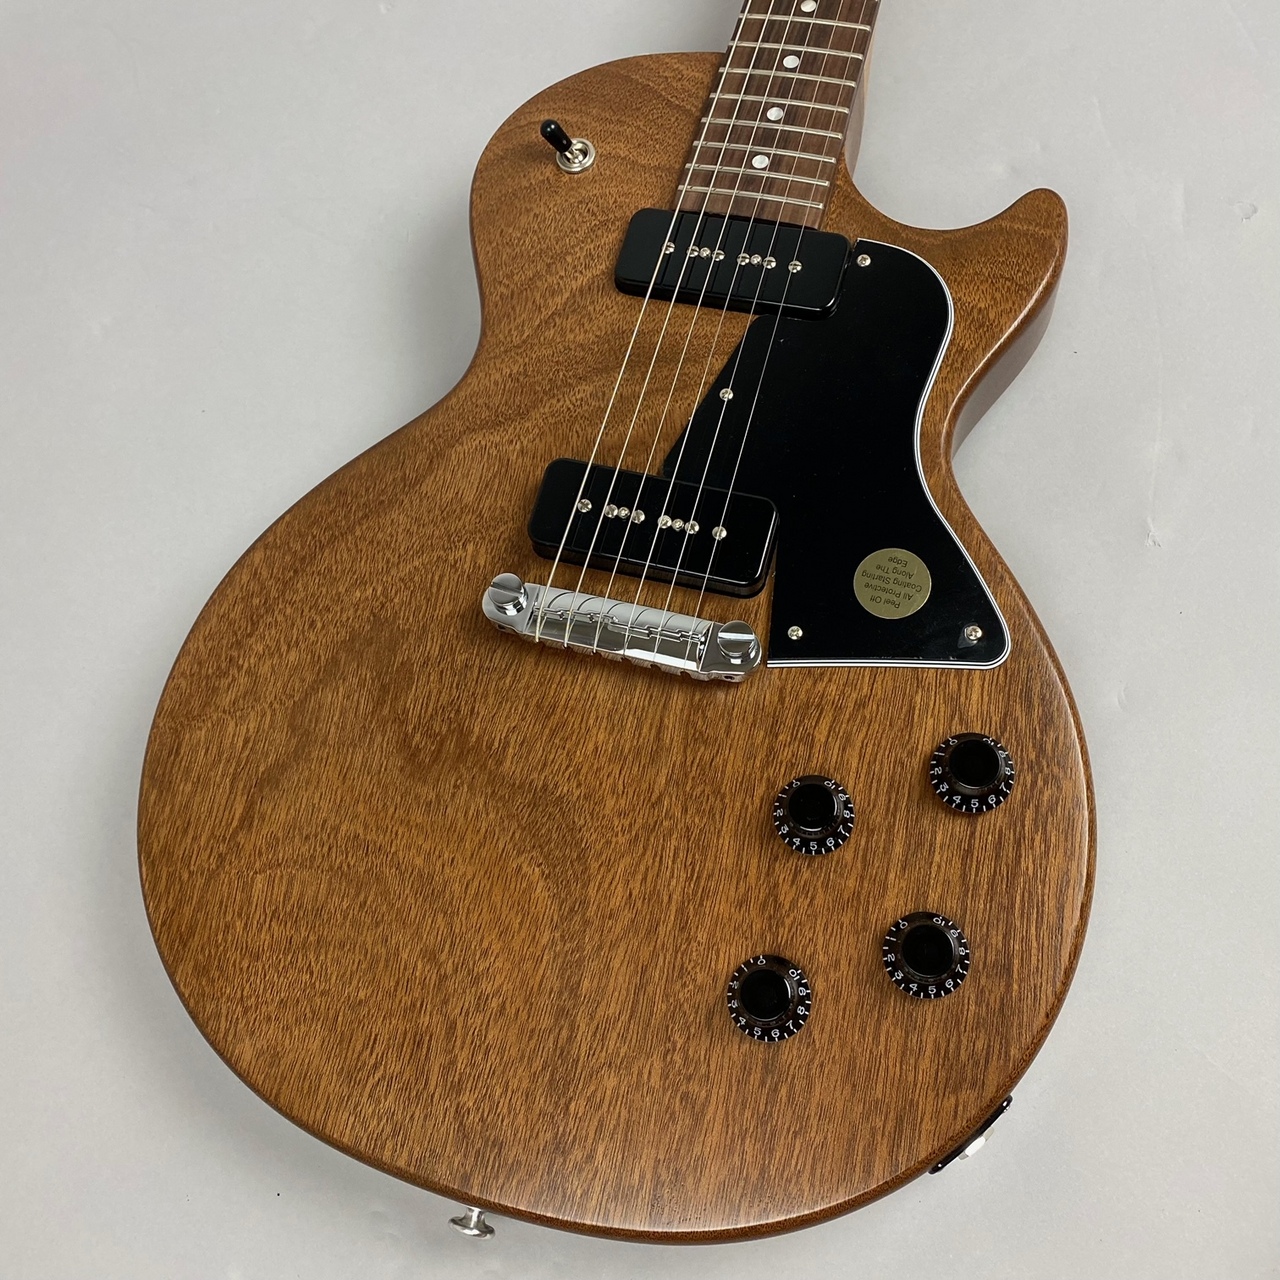 Gibson LP SPCL Tribute P-90 NWN Les Paul Special Tribute P-90 / Natural  Walnut Satin【現物画像】 ギブソン 【 マークイズ福岡ももち店】